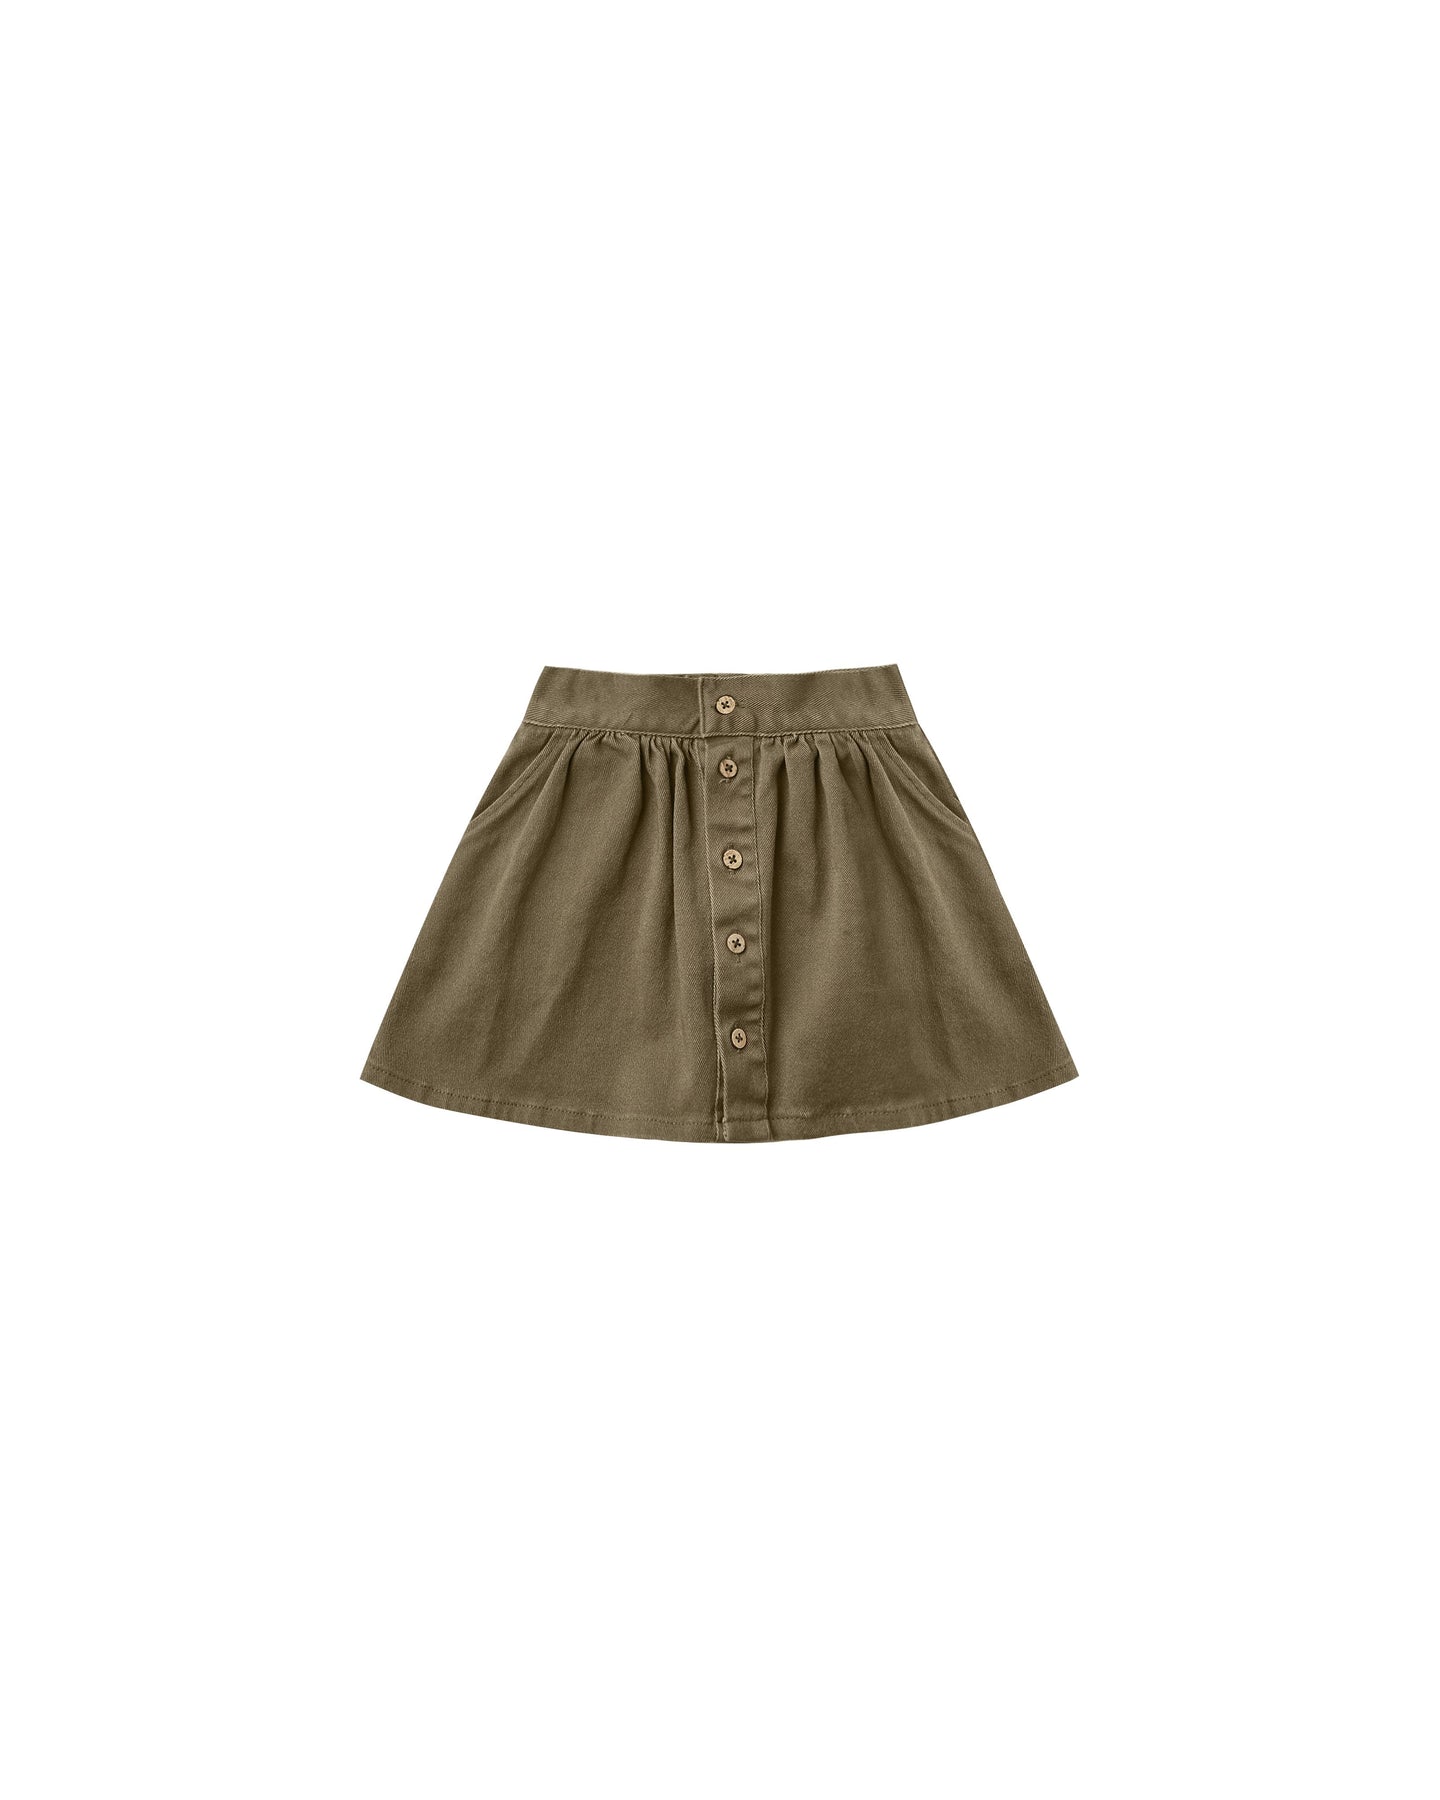 Rylee + Cru - Button Front Mini Skirt - Olive